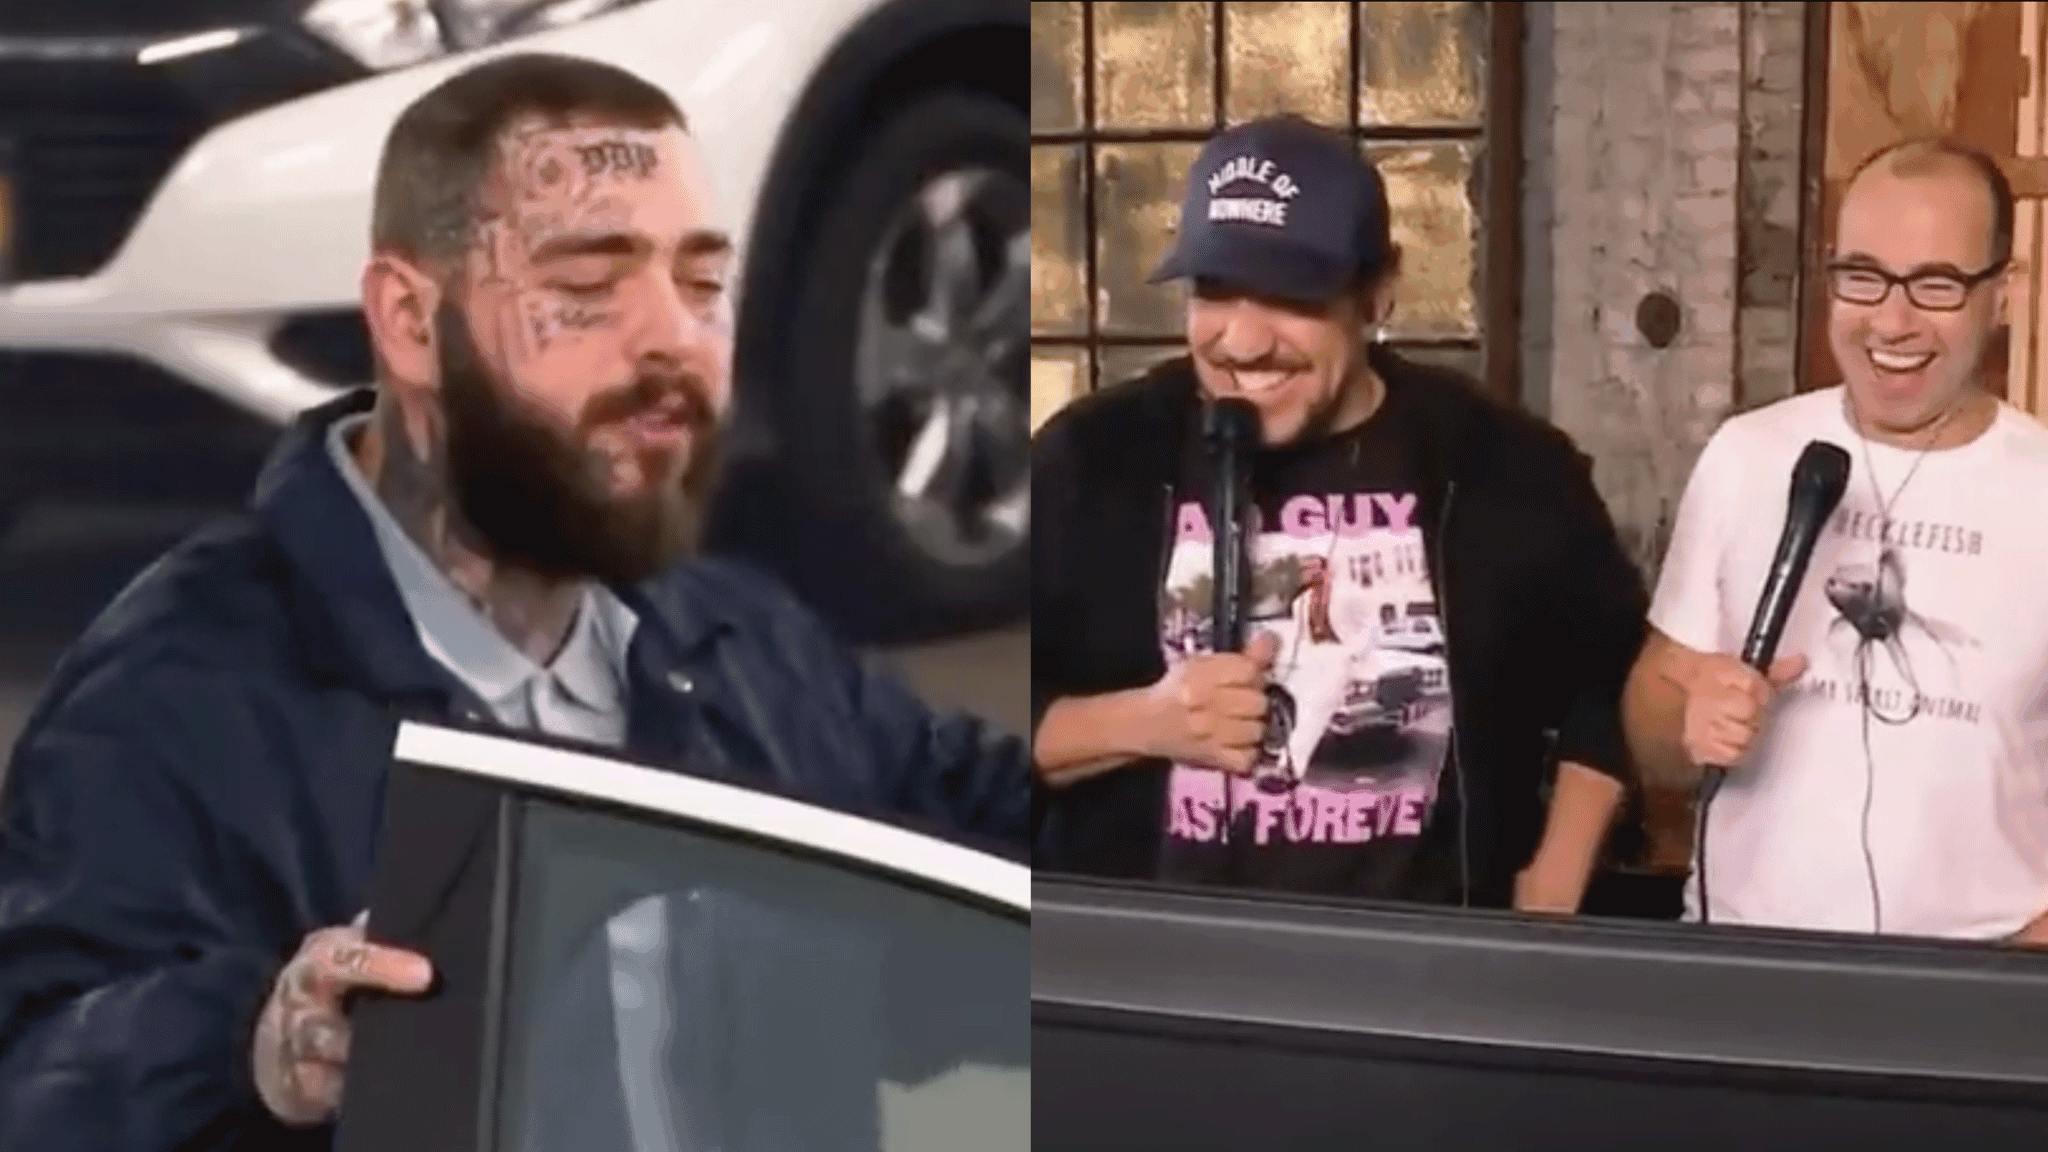 See Post Malone ‘hotbox’ someone’s car in new Impractical Jokers episode